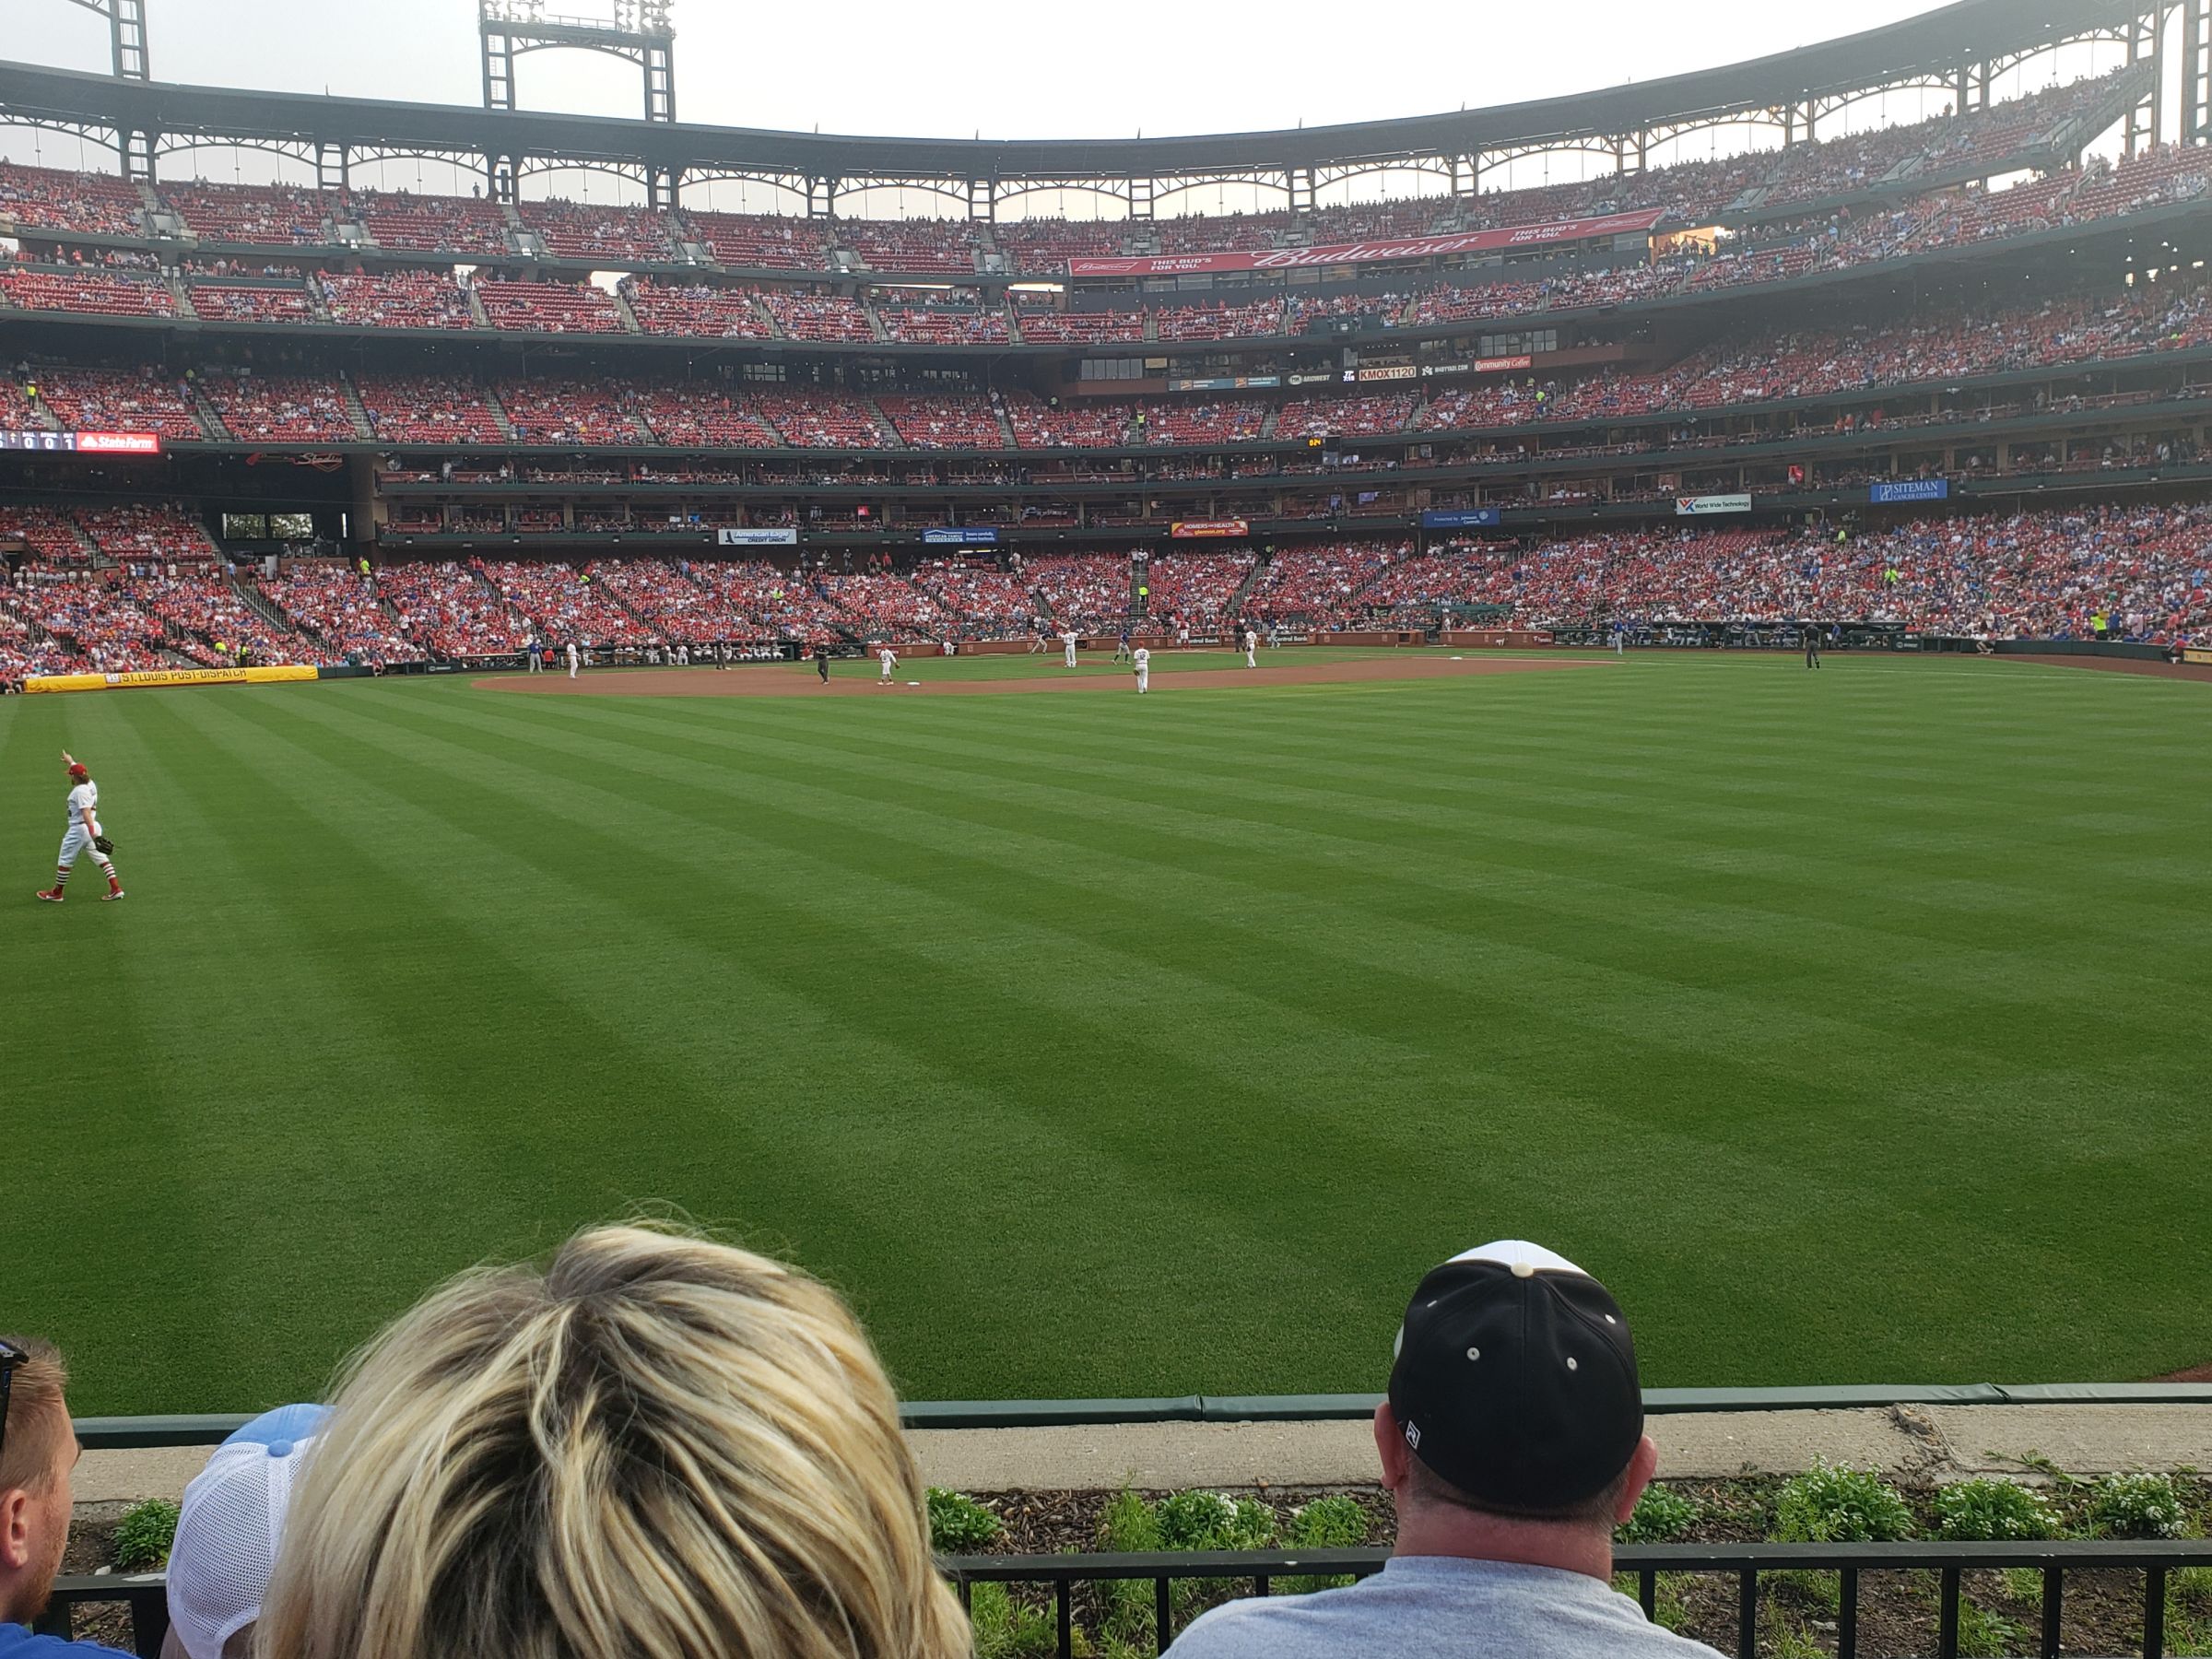 section 193, row 3 seat view  - busch stadium